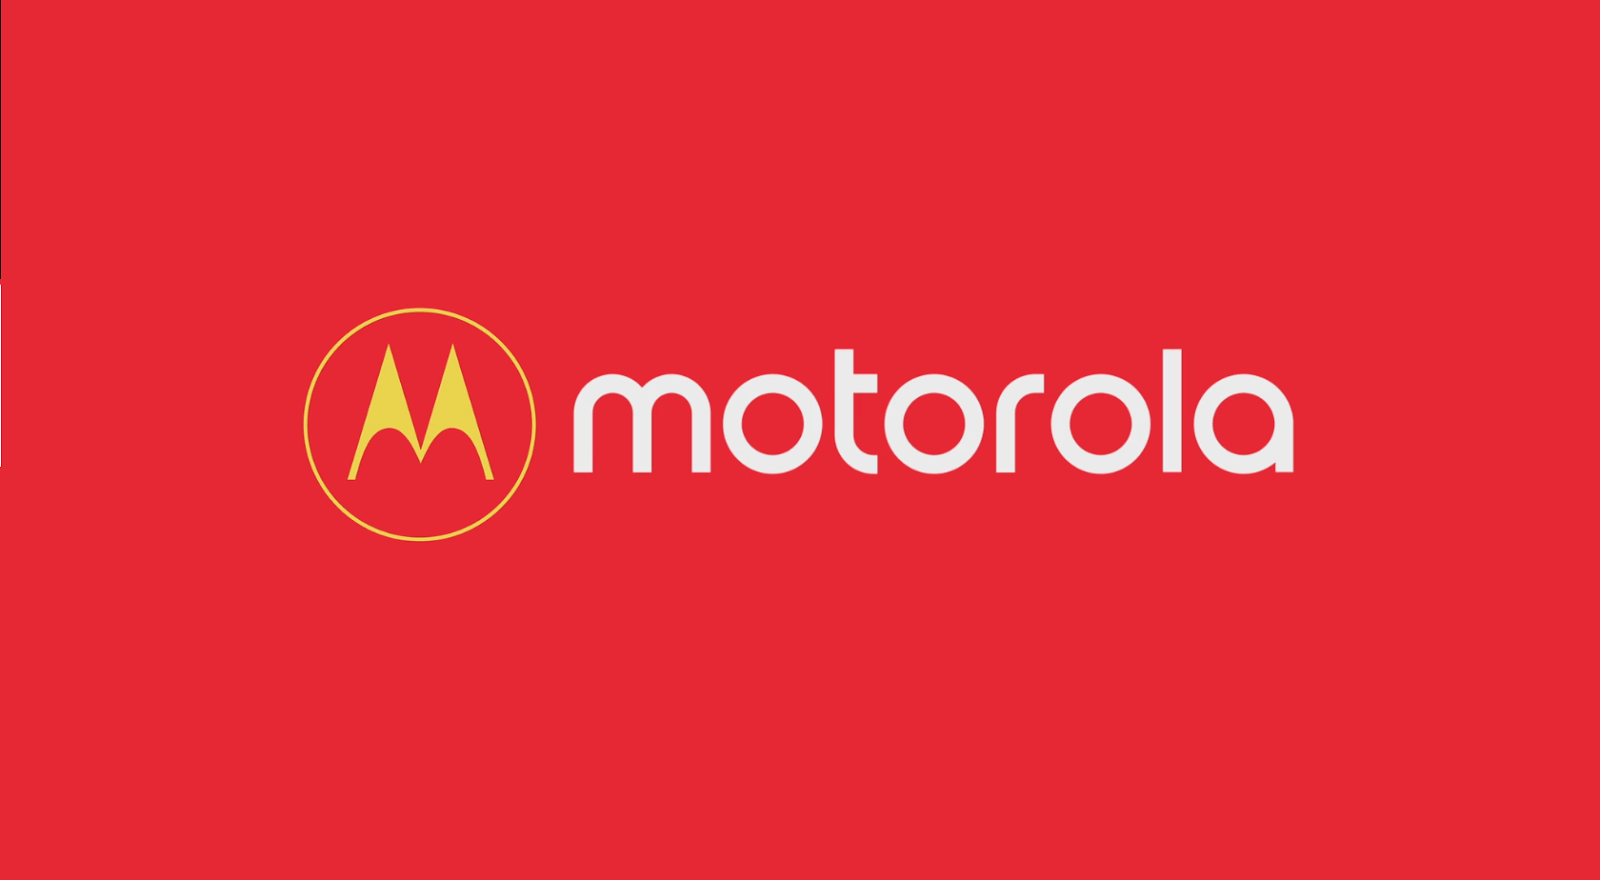 First Motorola Logo - Motorola's approaching from the announcement of the Motorola One is